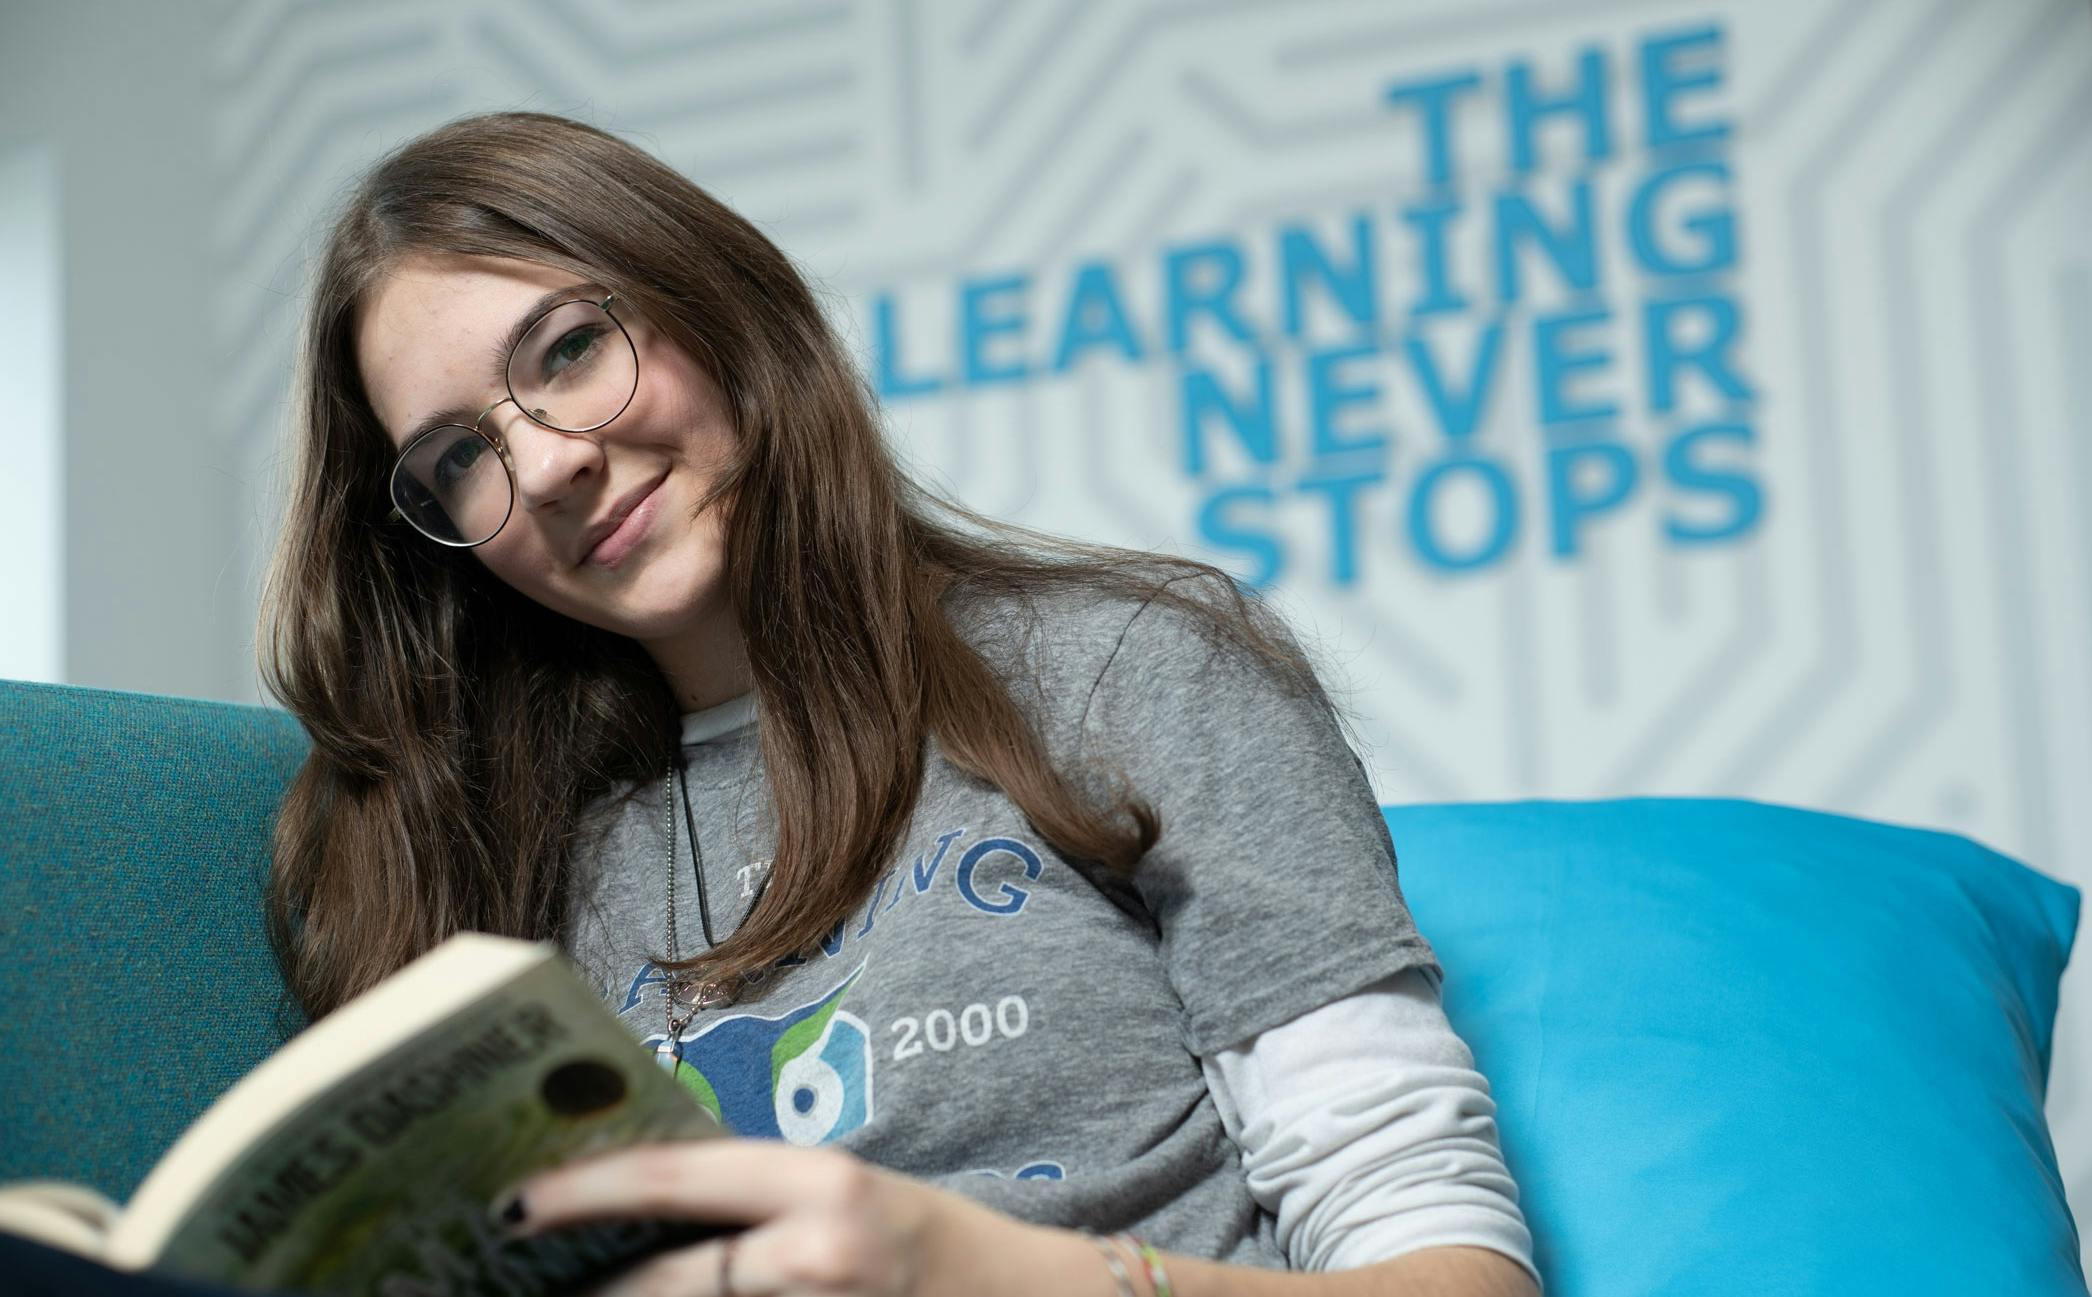 Teen student holds a book and smiles while looking at the camera. The rear wall says "The Learning Never Stops."